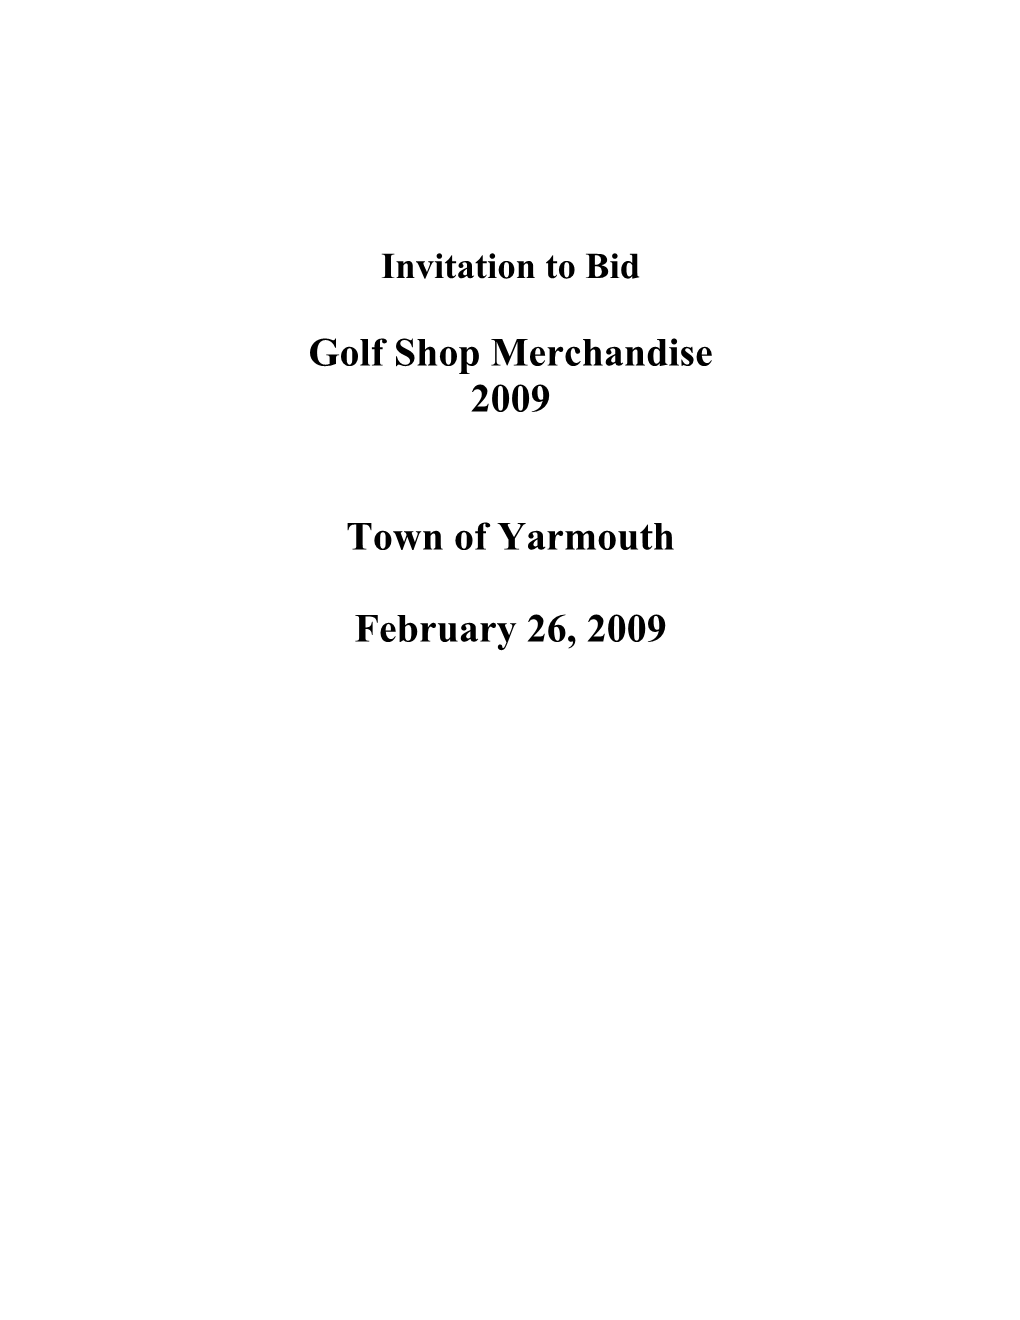 Golf Shop Merchandise 2009 Town of Yarmouth February 26, 2009